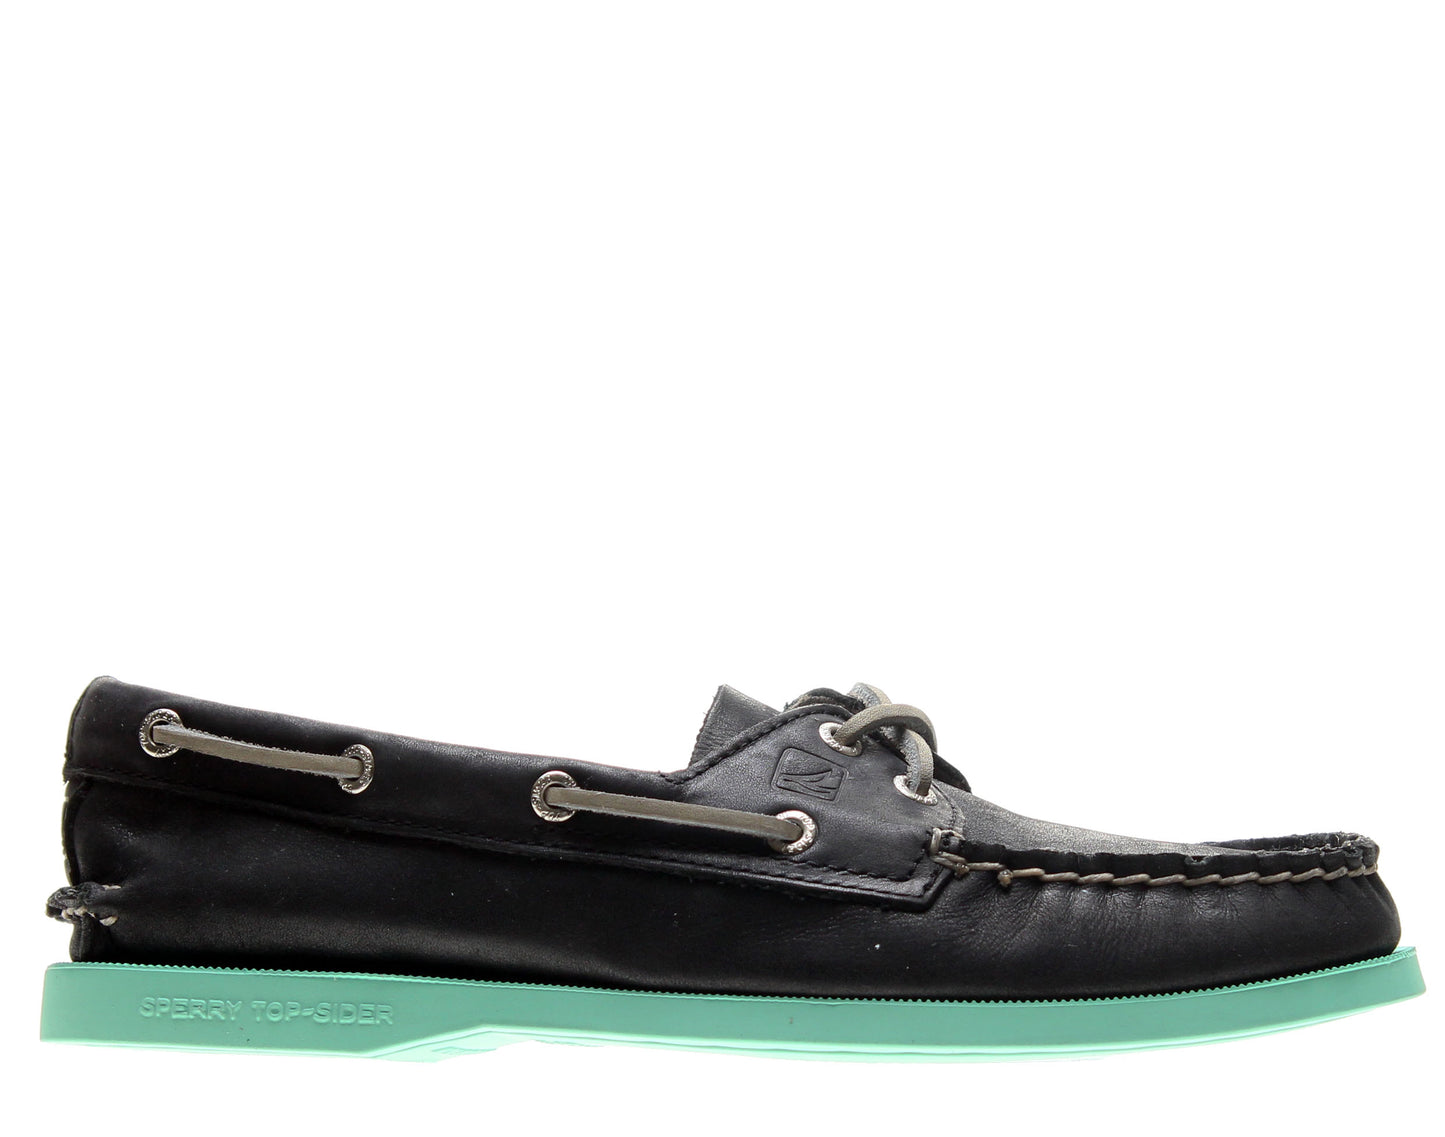 Sperry Top Sider Authentic Original Color Pop 2-Eye Black Leather/Jade Women's Boat Shoes 9093162